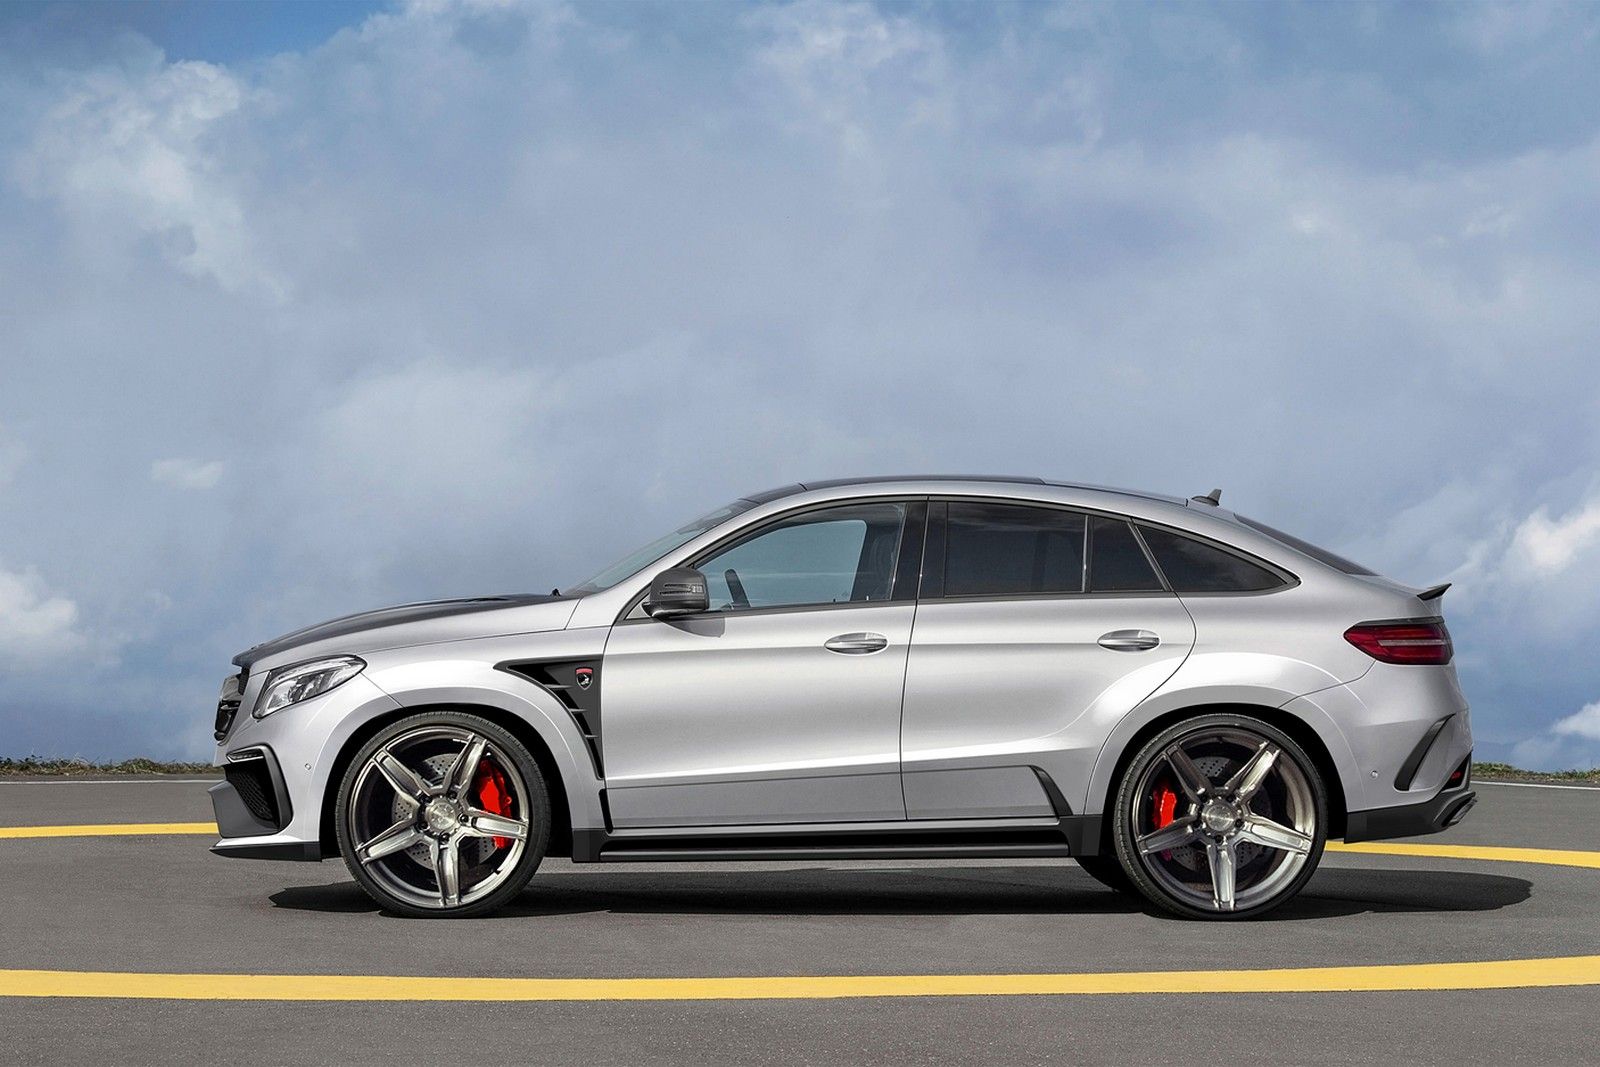 2016 Mercedes-Benz GLE Coupe Inferno By TopCar